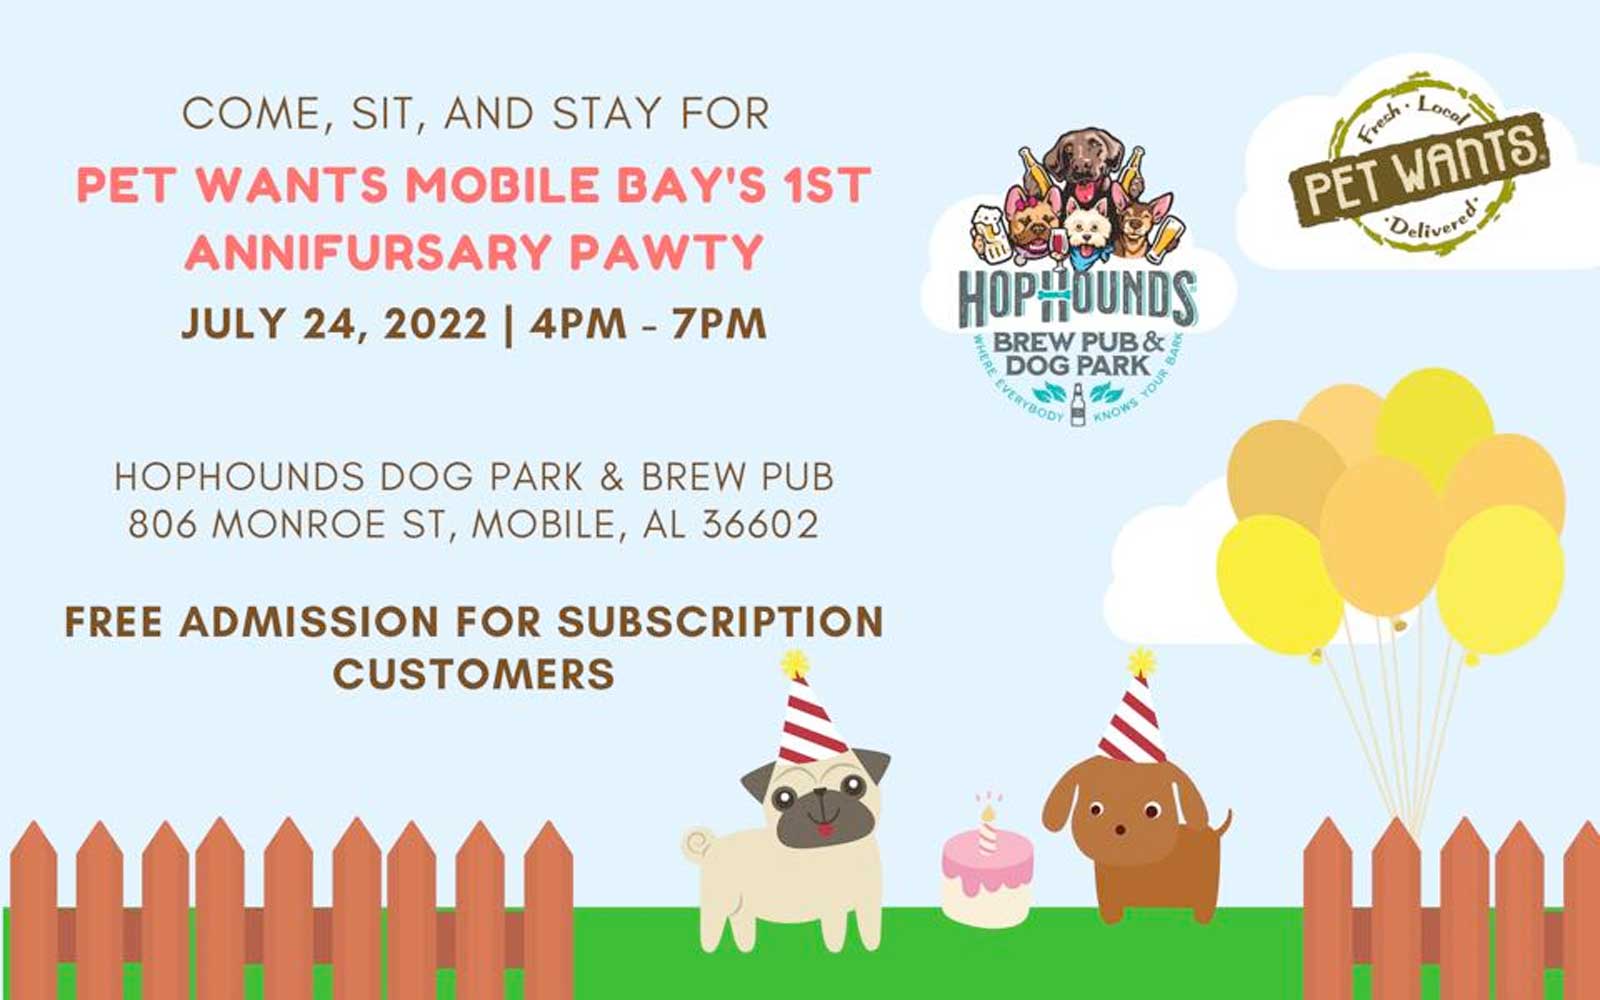 Pet Wants Mobile Bay Celebrates One Year